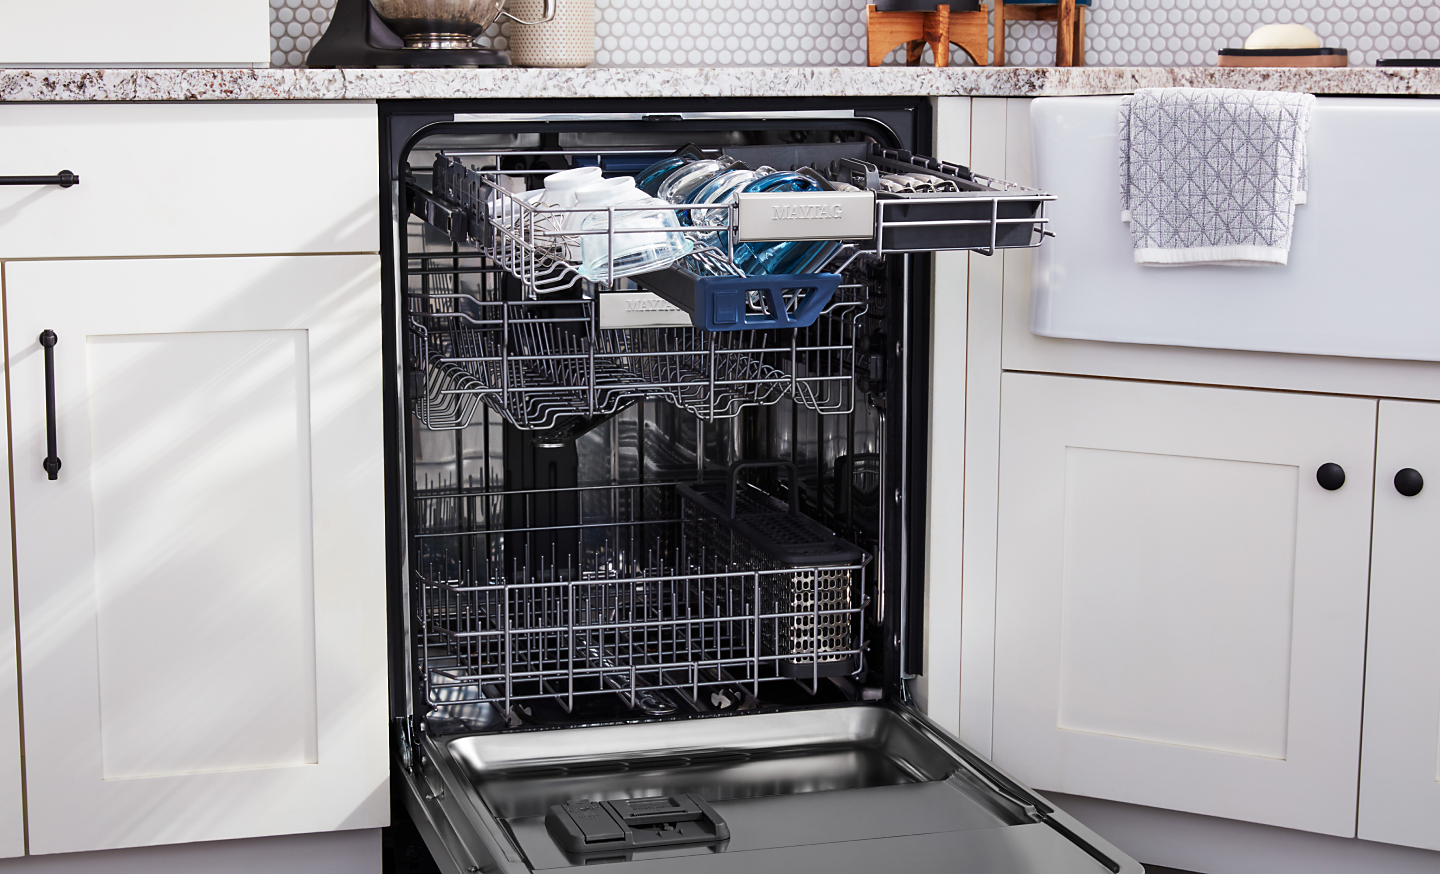 How to Fix Your Dishwasher: Troubleshooting & Repair